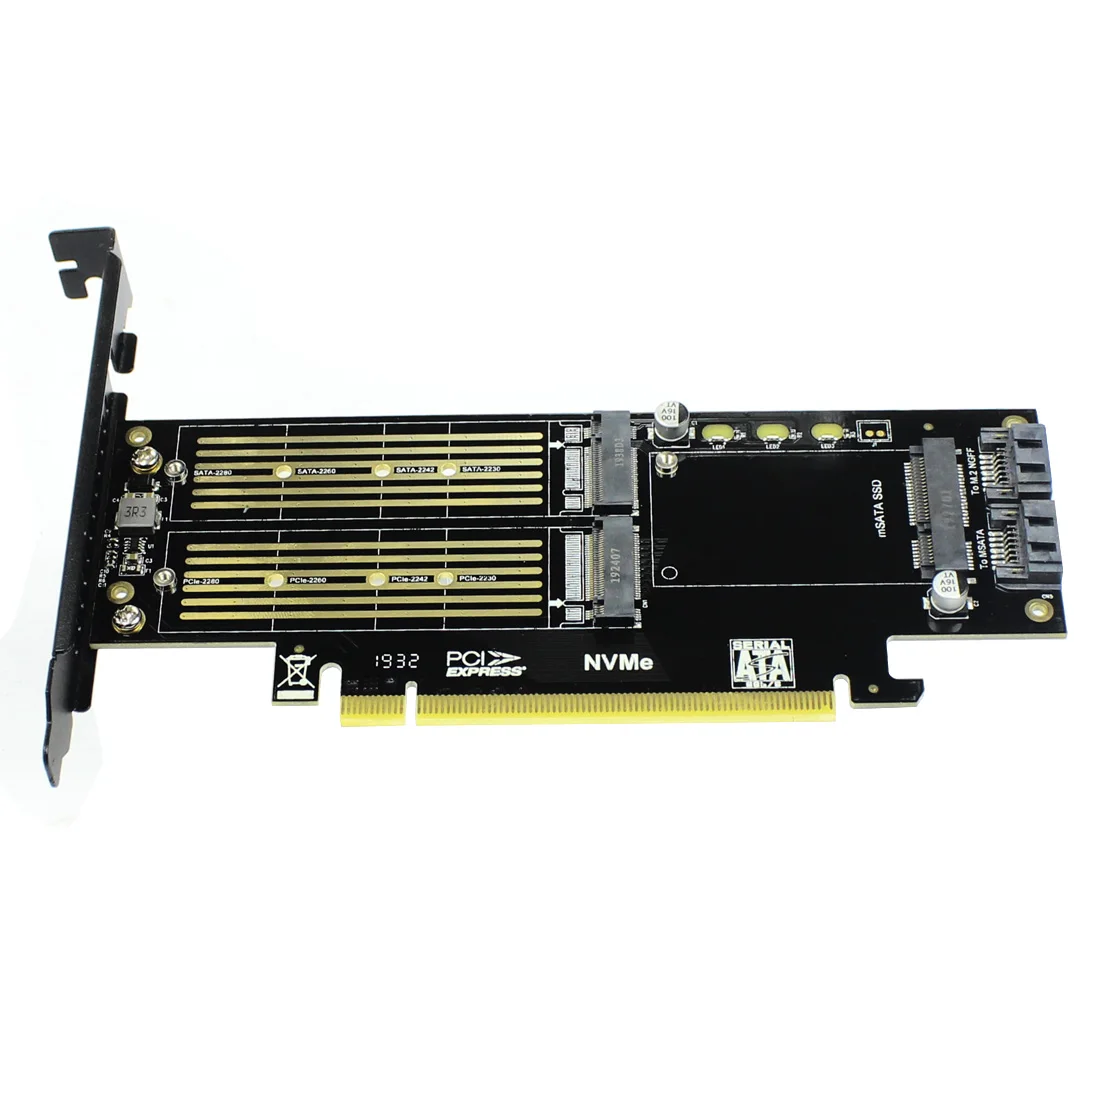 

JEYI SK16 M.2 for NVMe SSD for NGFF to PCIE 3.0 X4 Adapter M Key B Key mSATA add on card Suppor PCI Express 3.0 3 in 1 Converter